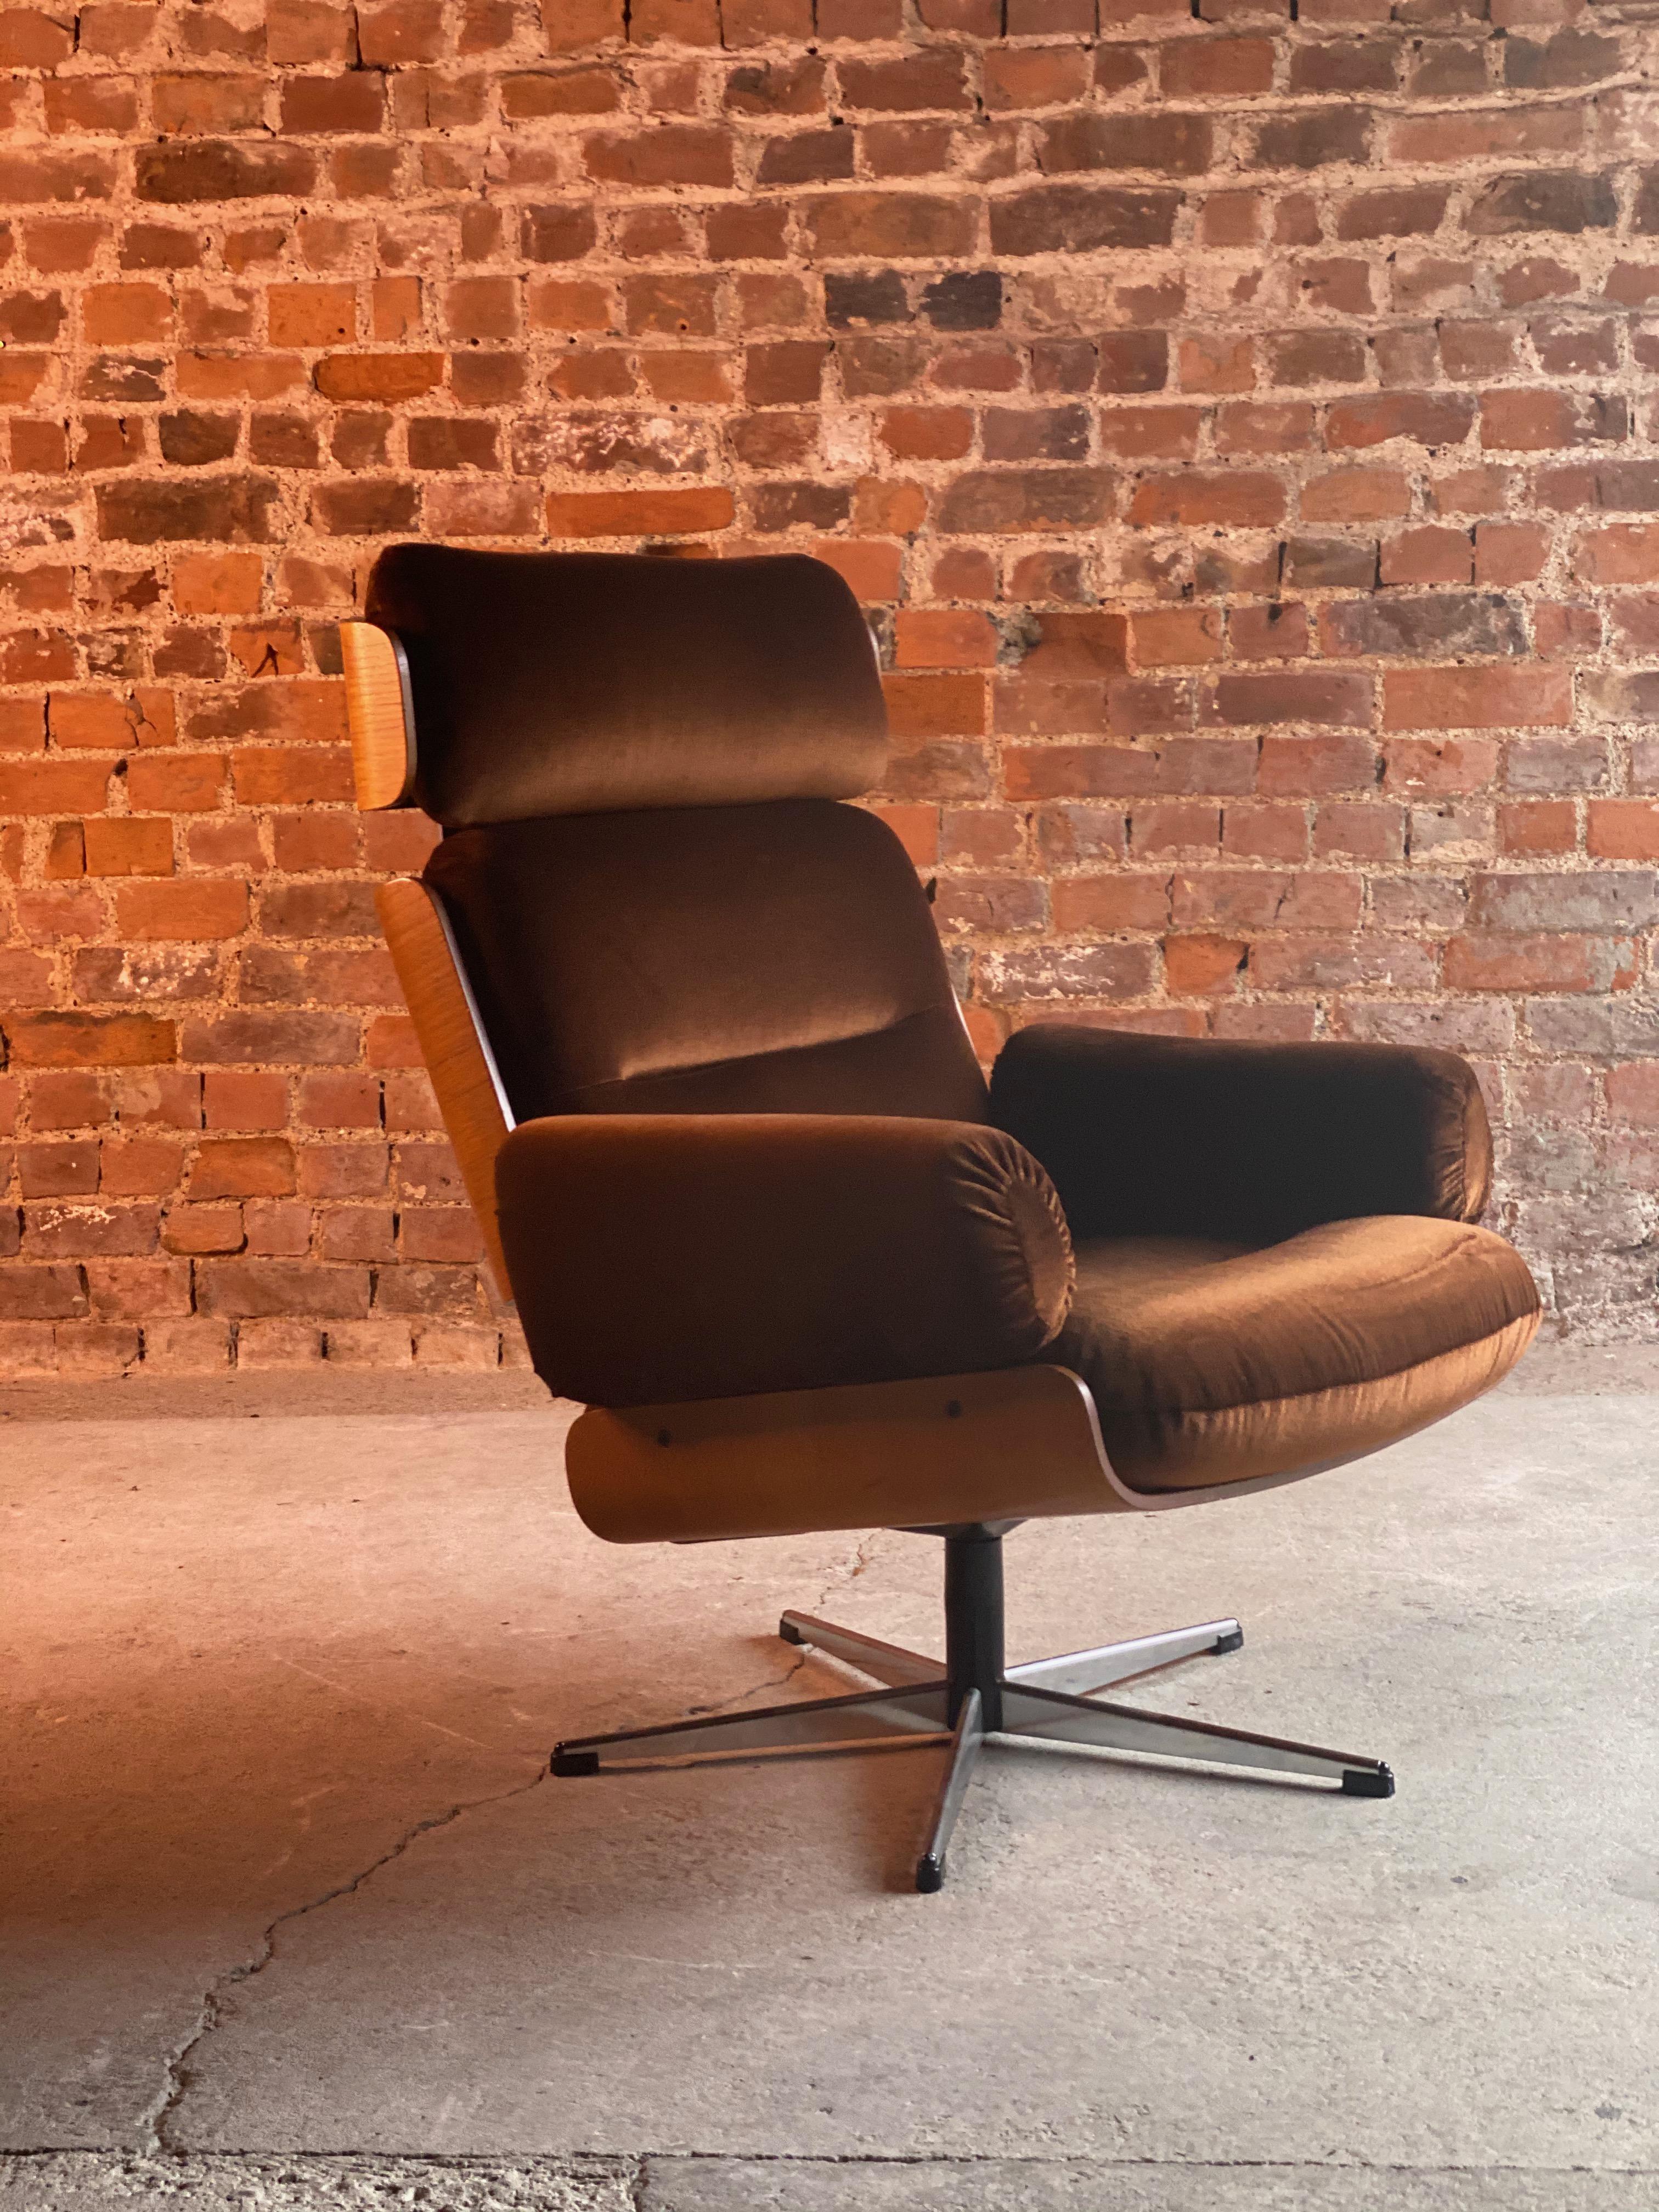 Guy Rogers Lounge Chair Eames Plycraft Style Mad Men Era Midcentury, 1960s 5